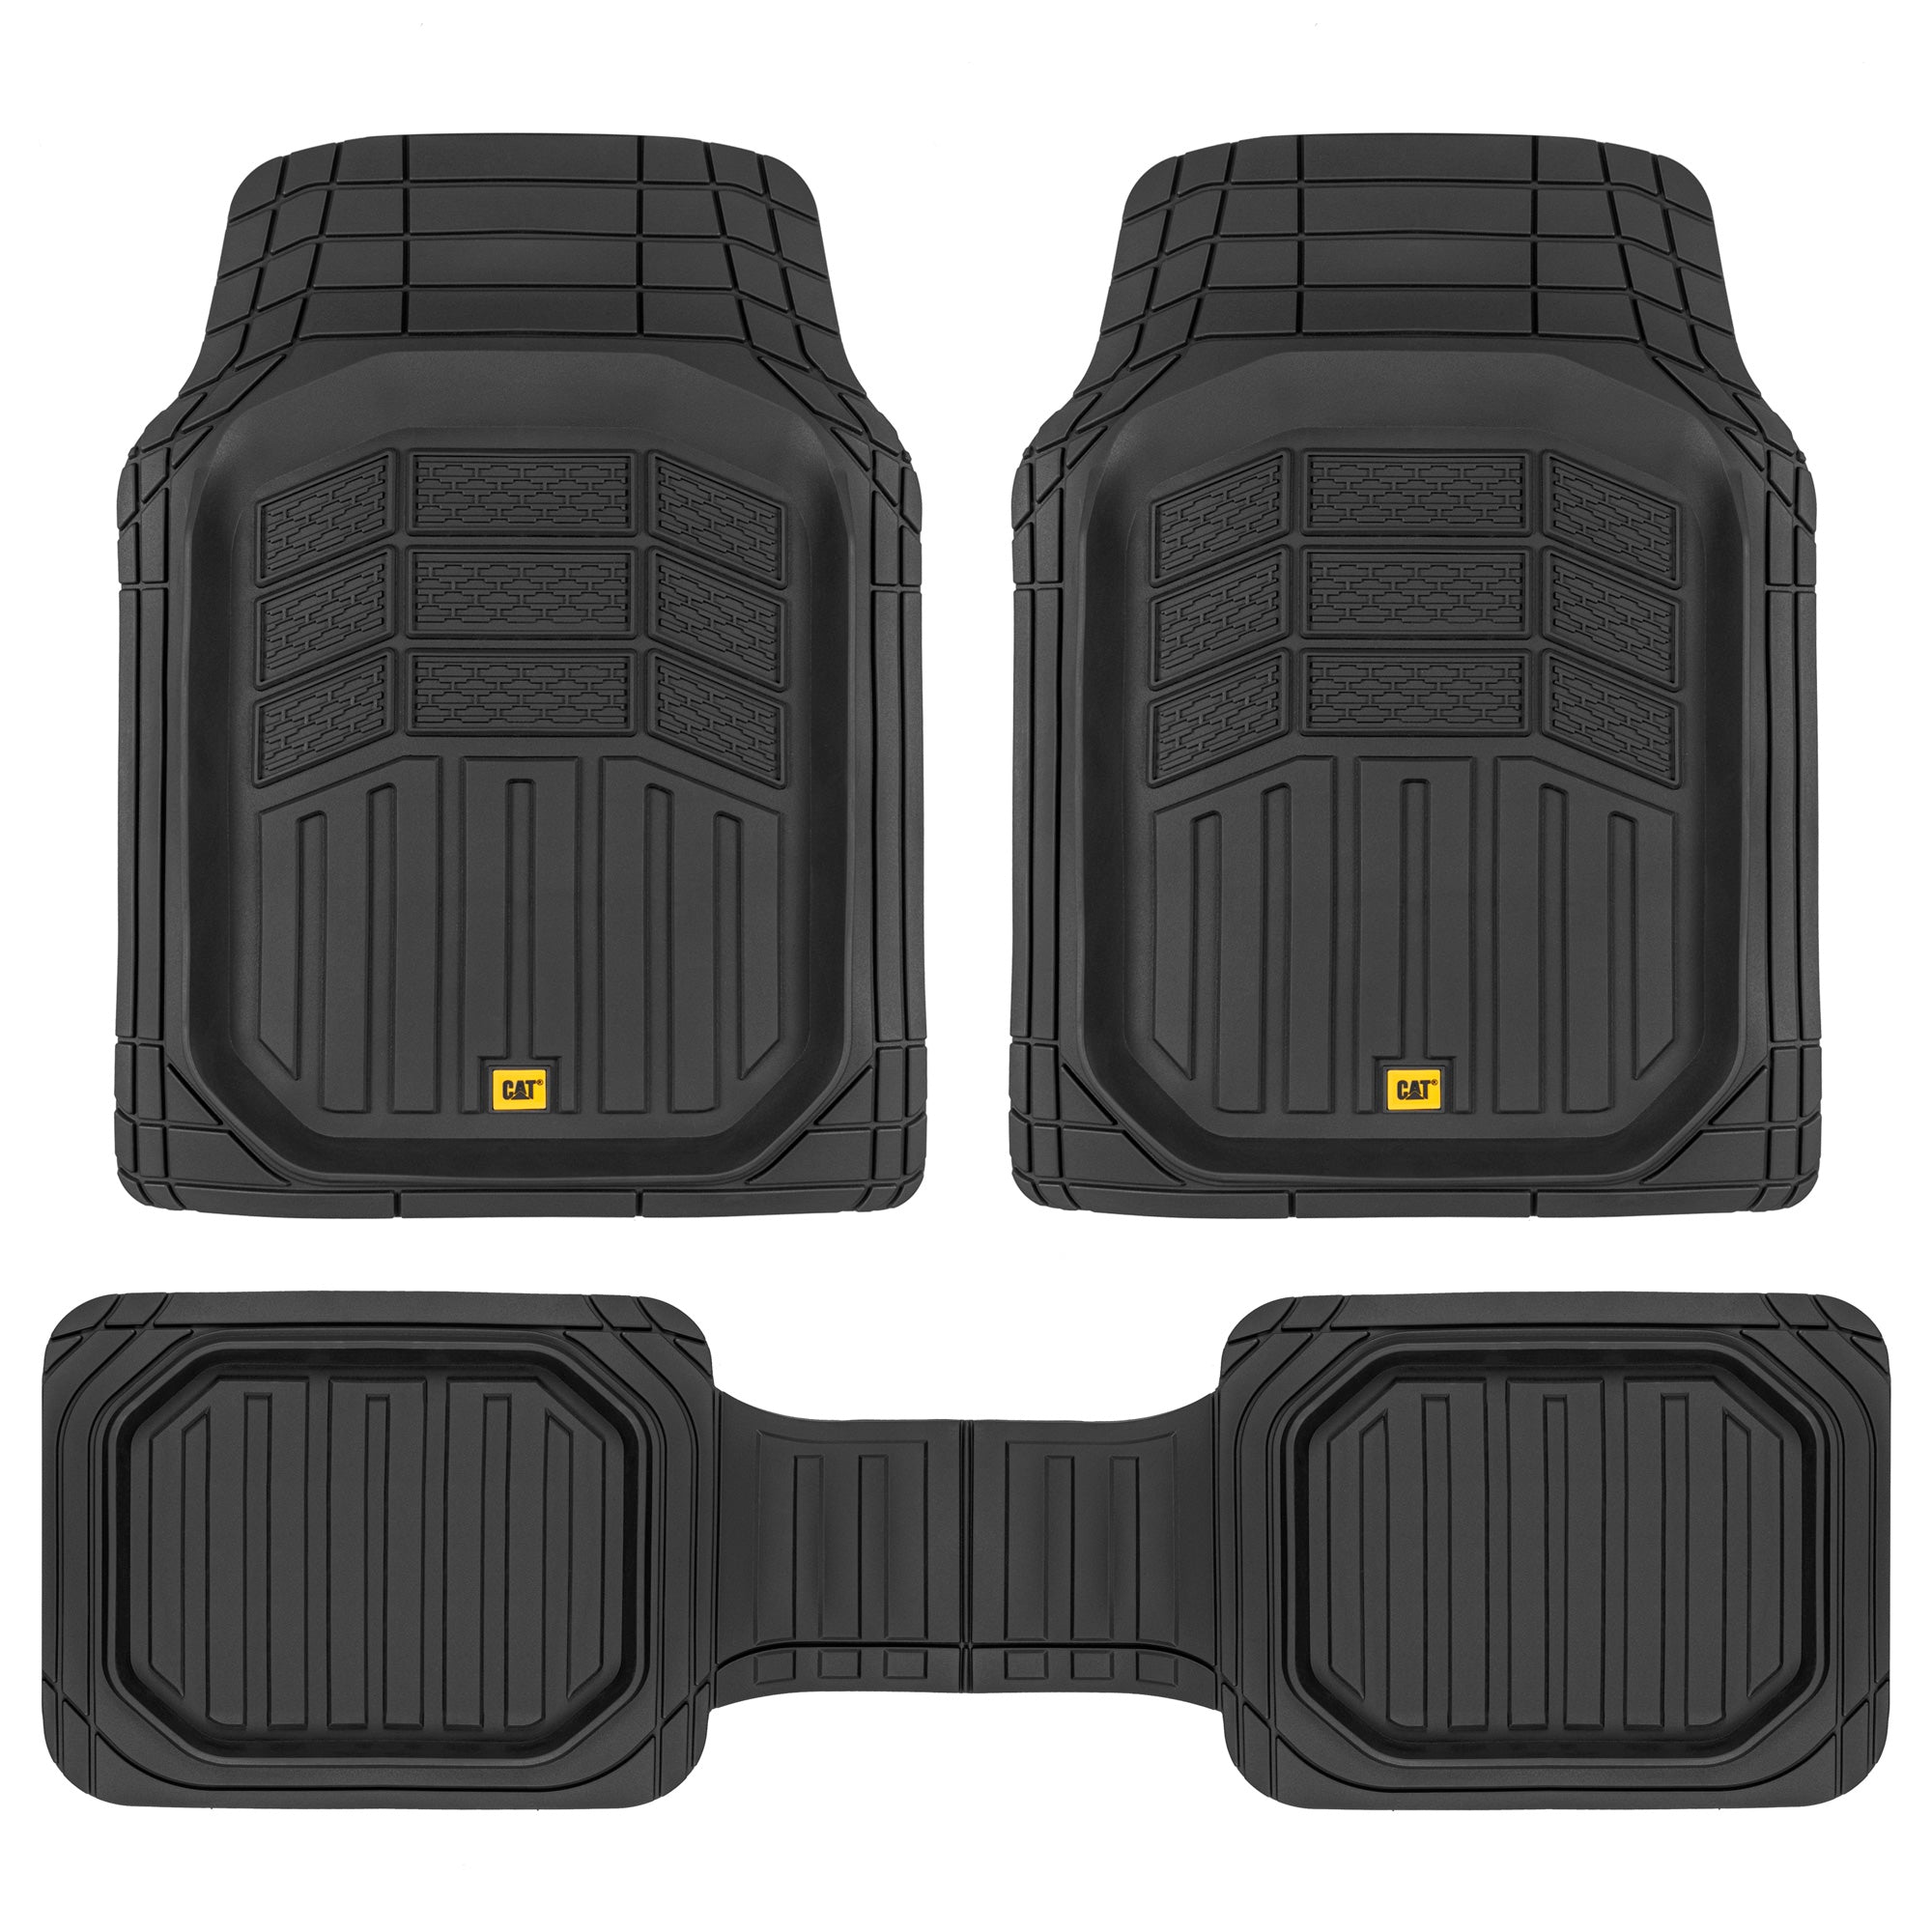 Cat® CAMT-9013 (3-Piece) Heavy Duty Deep Dish Rubber Floor Mats, Trim to Fit for Car Truck SUV & Van, All Weather Total Protection Durable Liners - Beige:#D2B48C